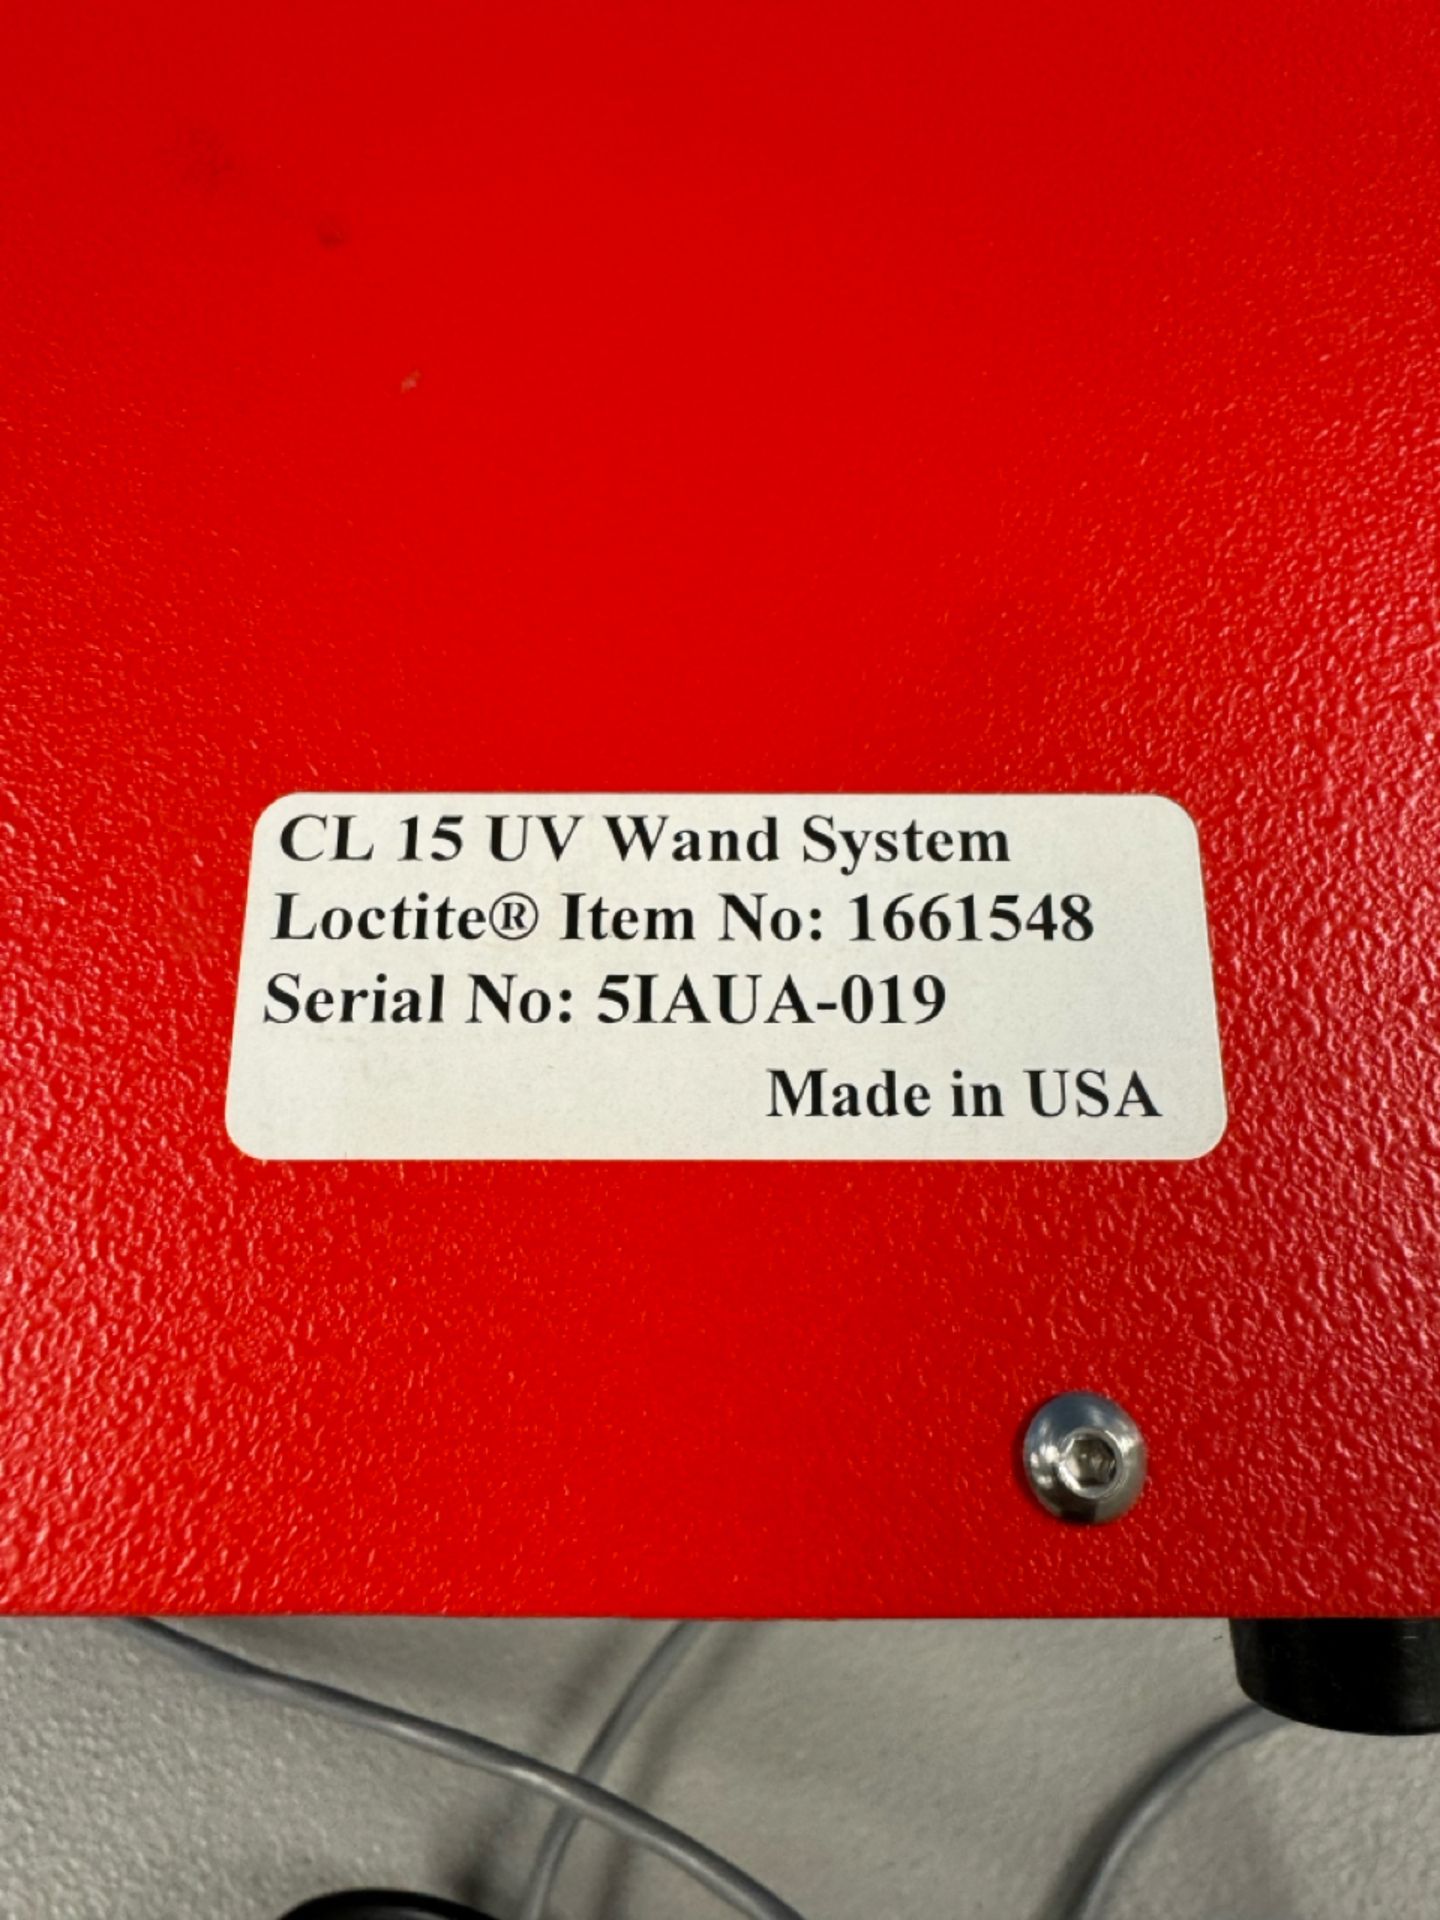 Loctite UV Wand System - Image 4 of 4